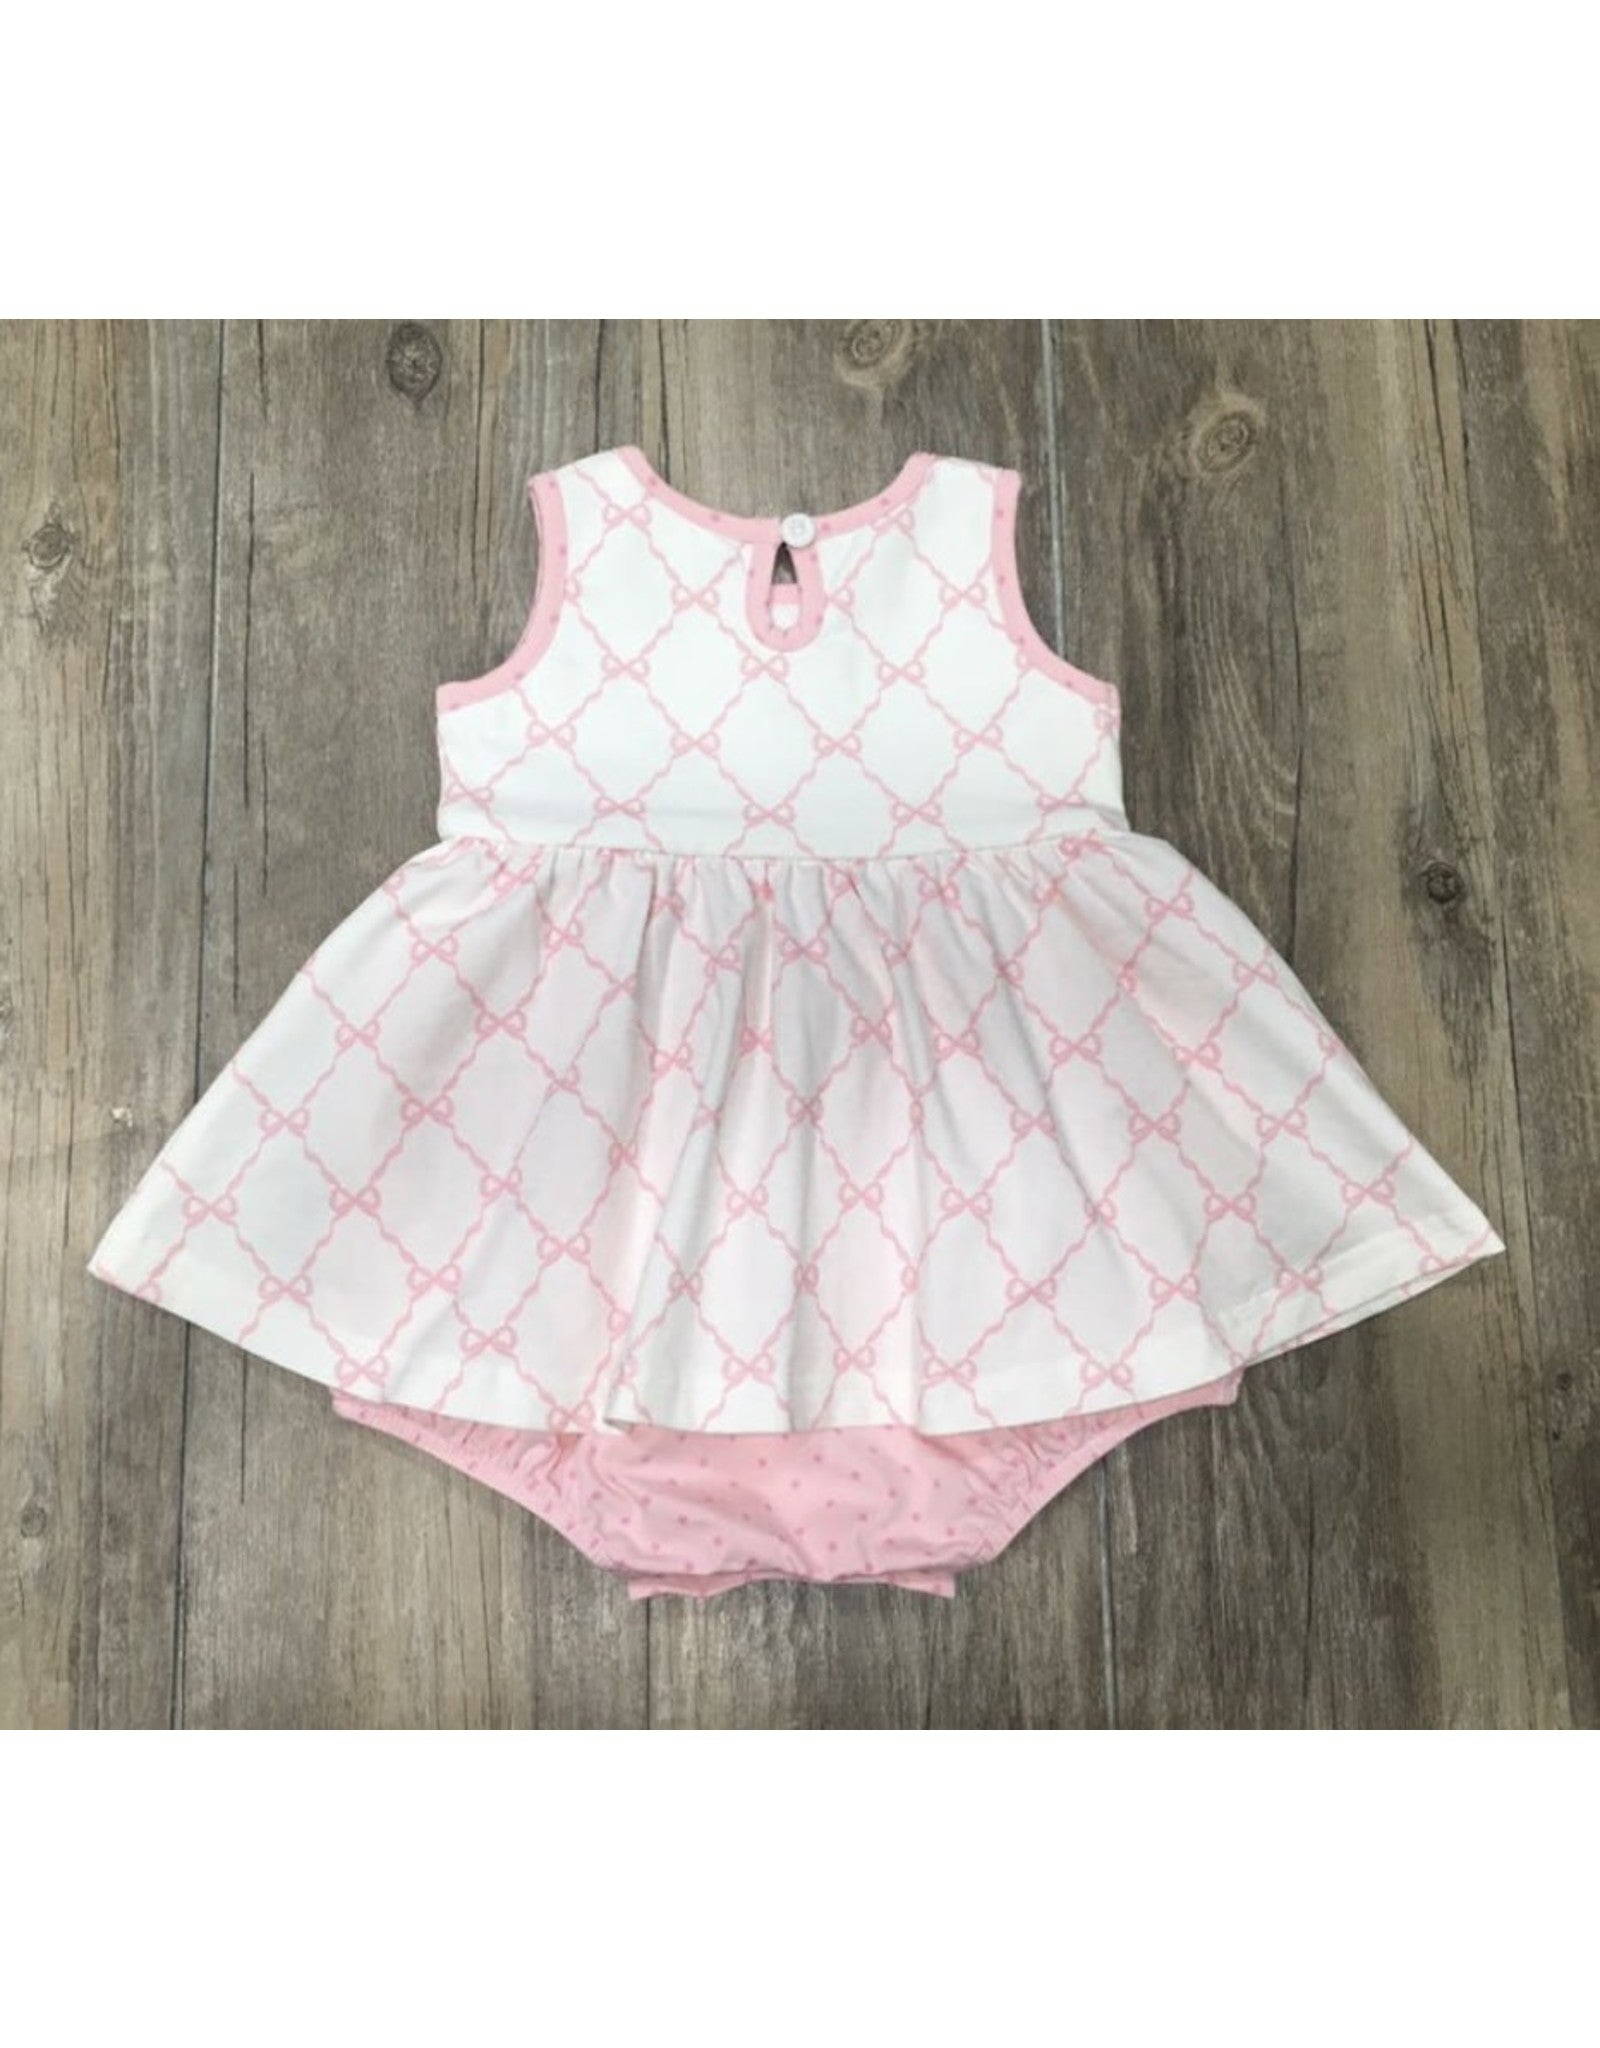 Bliss Bubble Dress in Bows N Berries  - Doodlebug's Children's Boutique